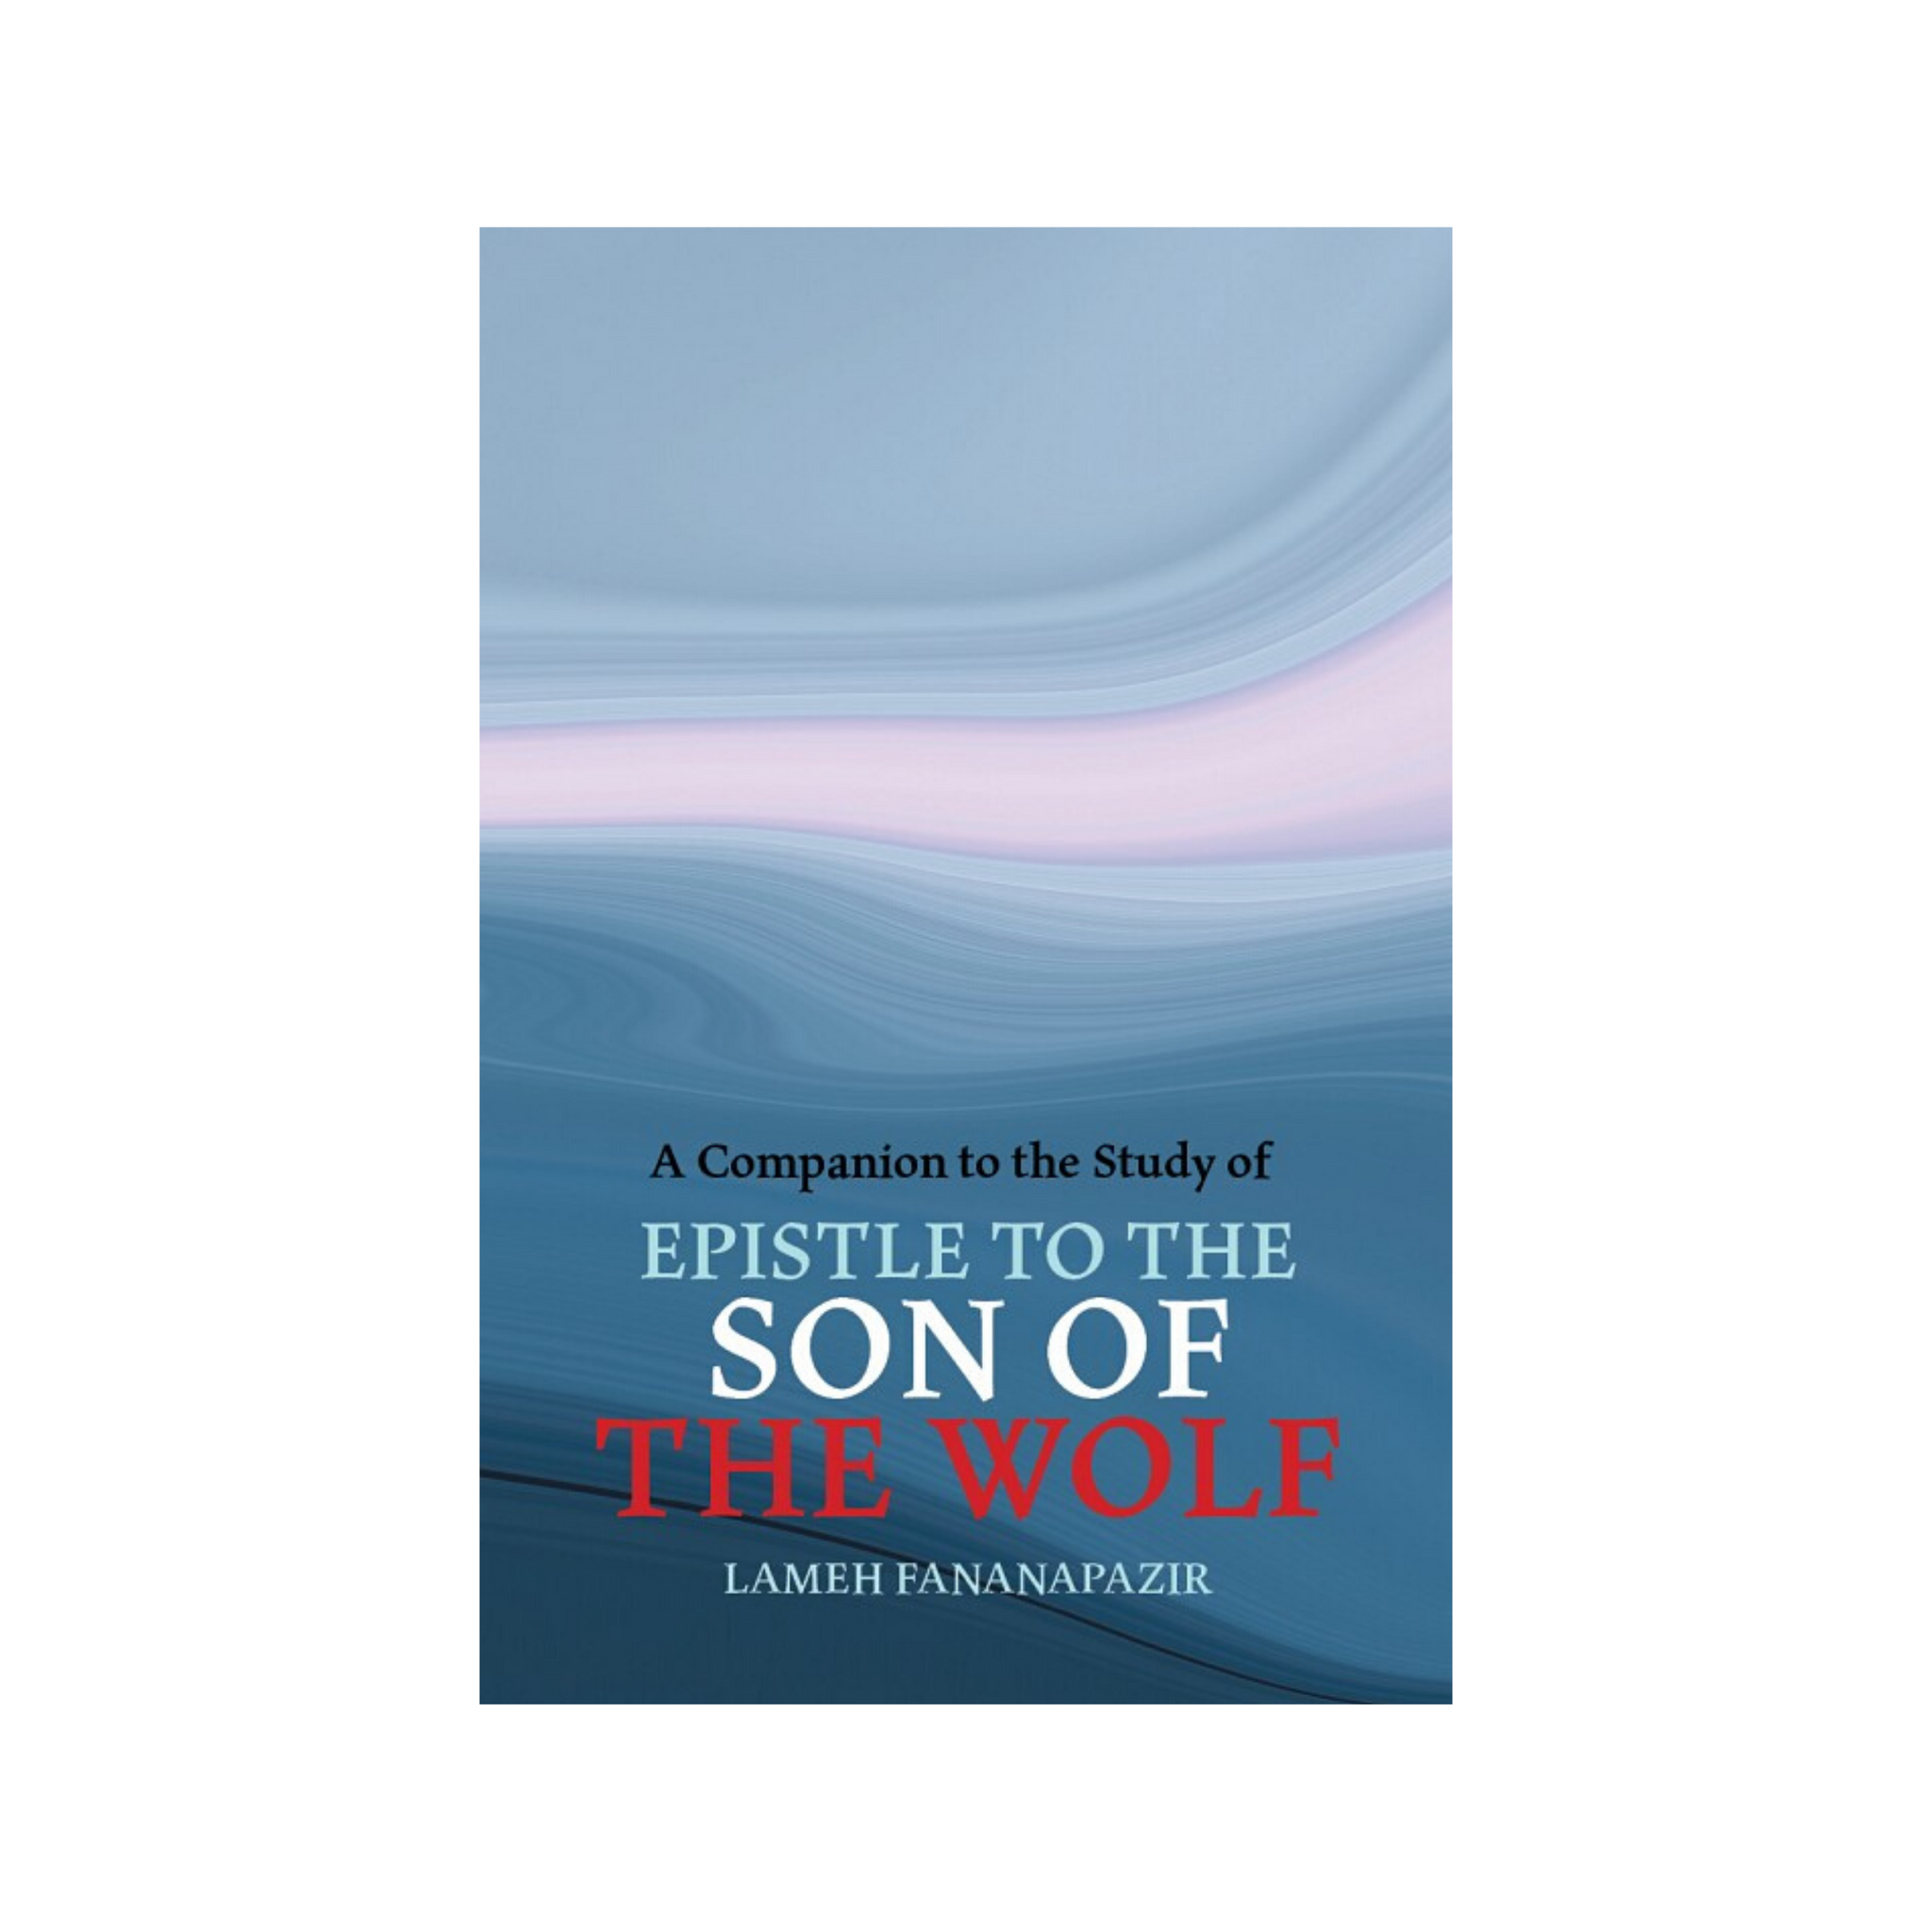 Companion to the Study of the Epistle of the Son of the Wolf